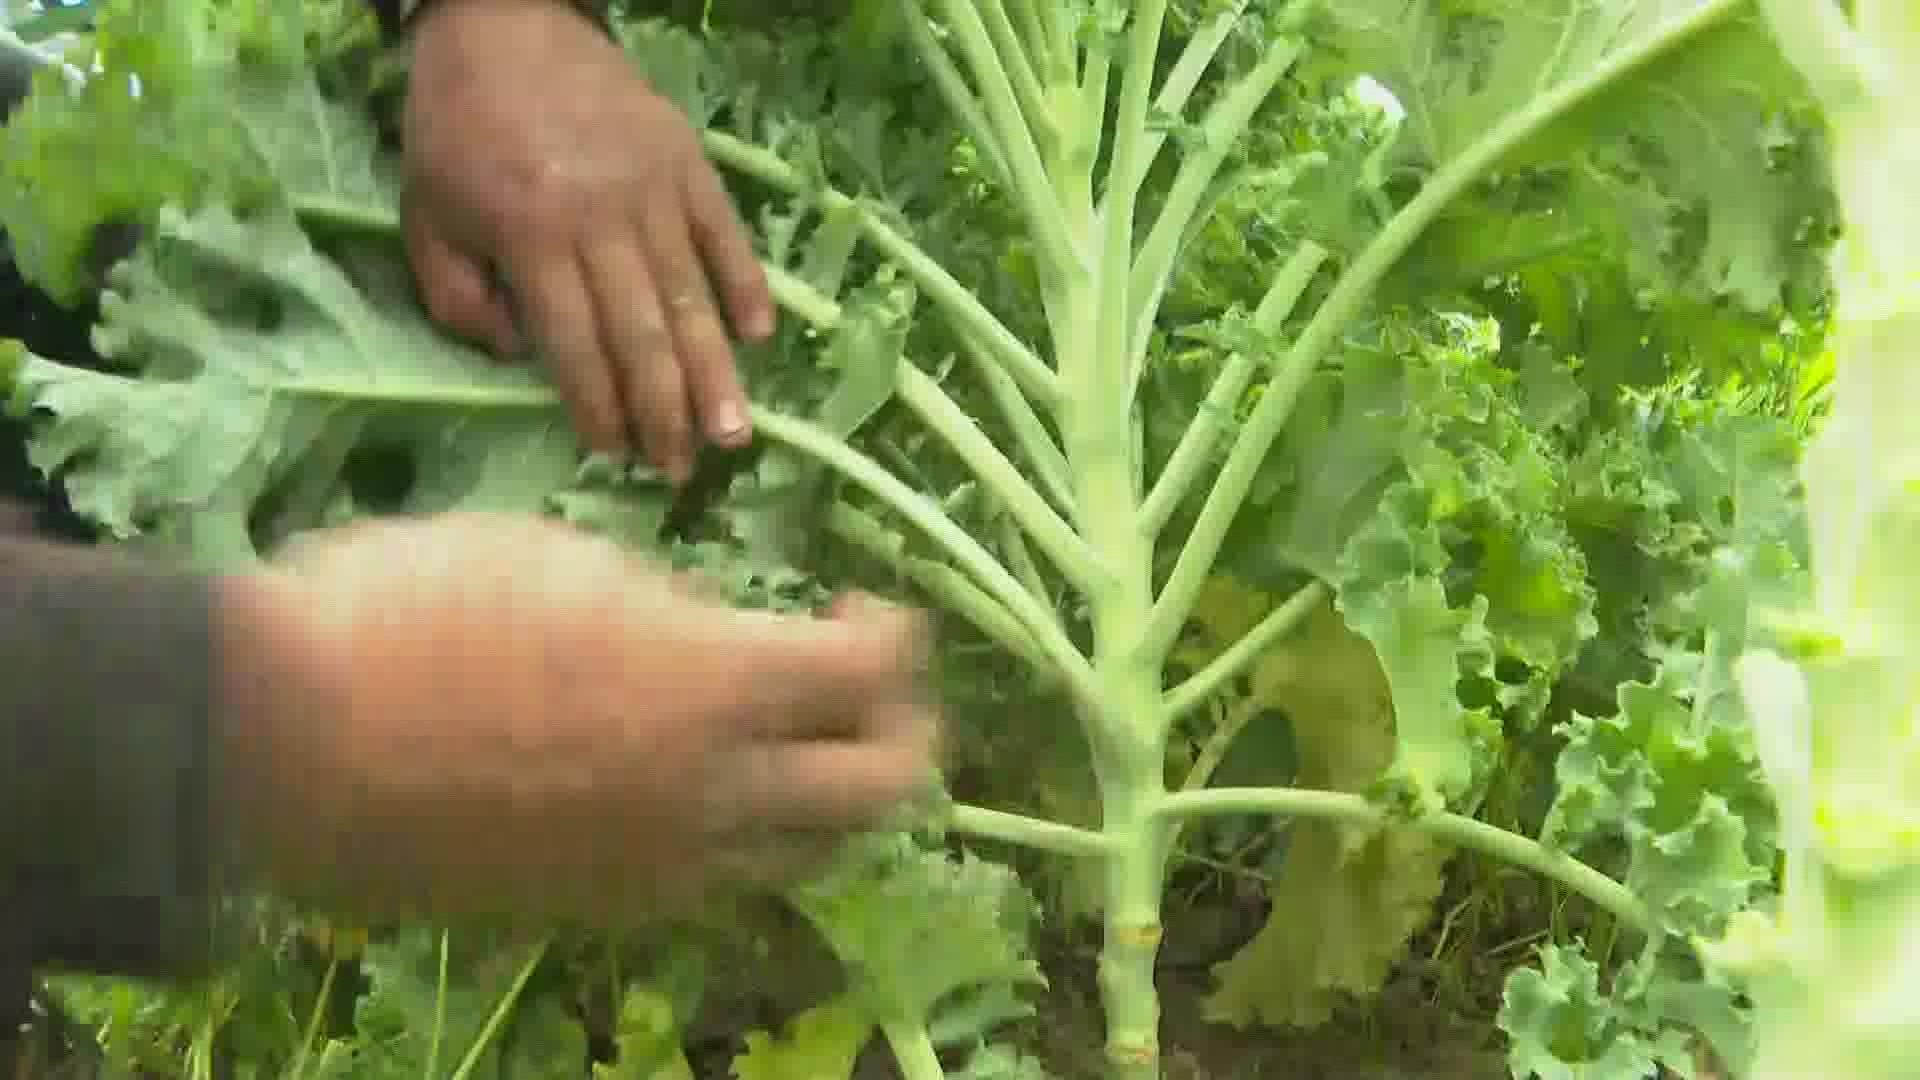 This year, 53 Maine farms requested help from migrant workers.